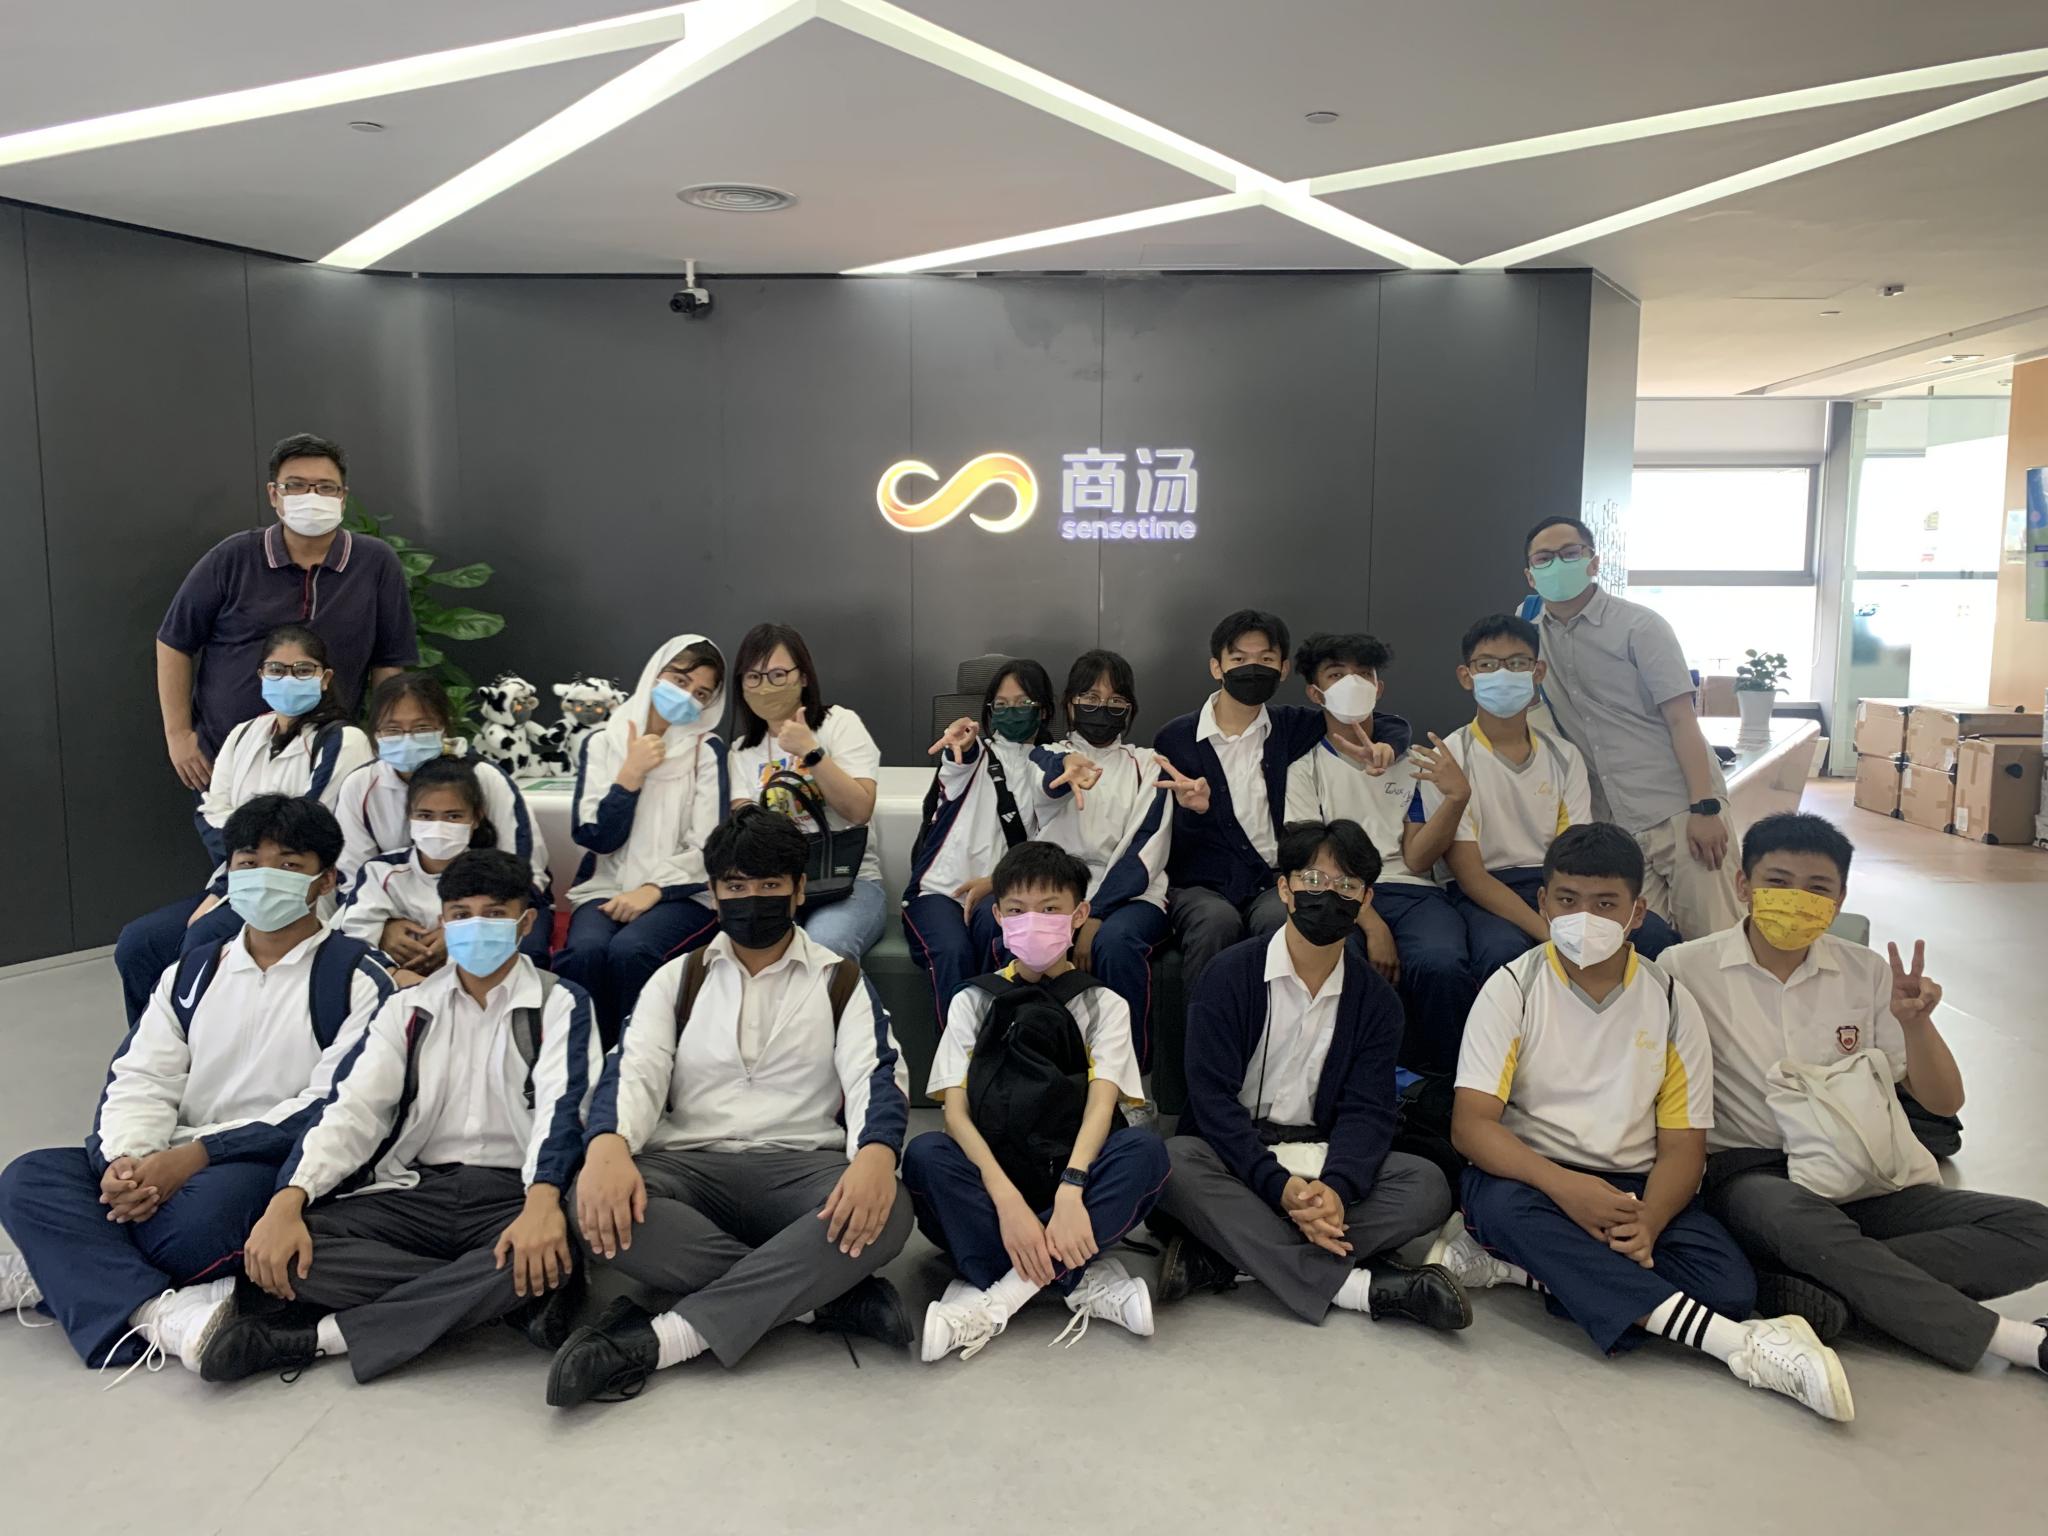 Students visit the experience lab of Sensetime at the HKSTP.